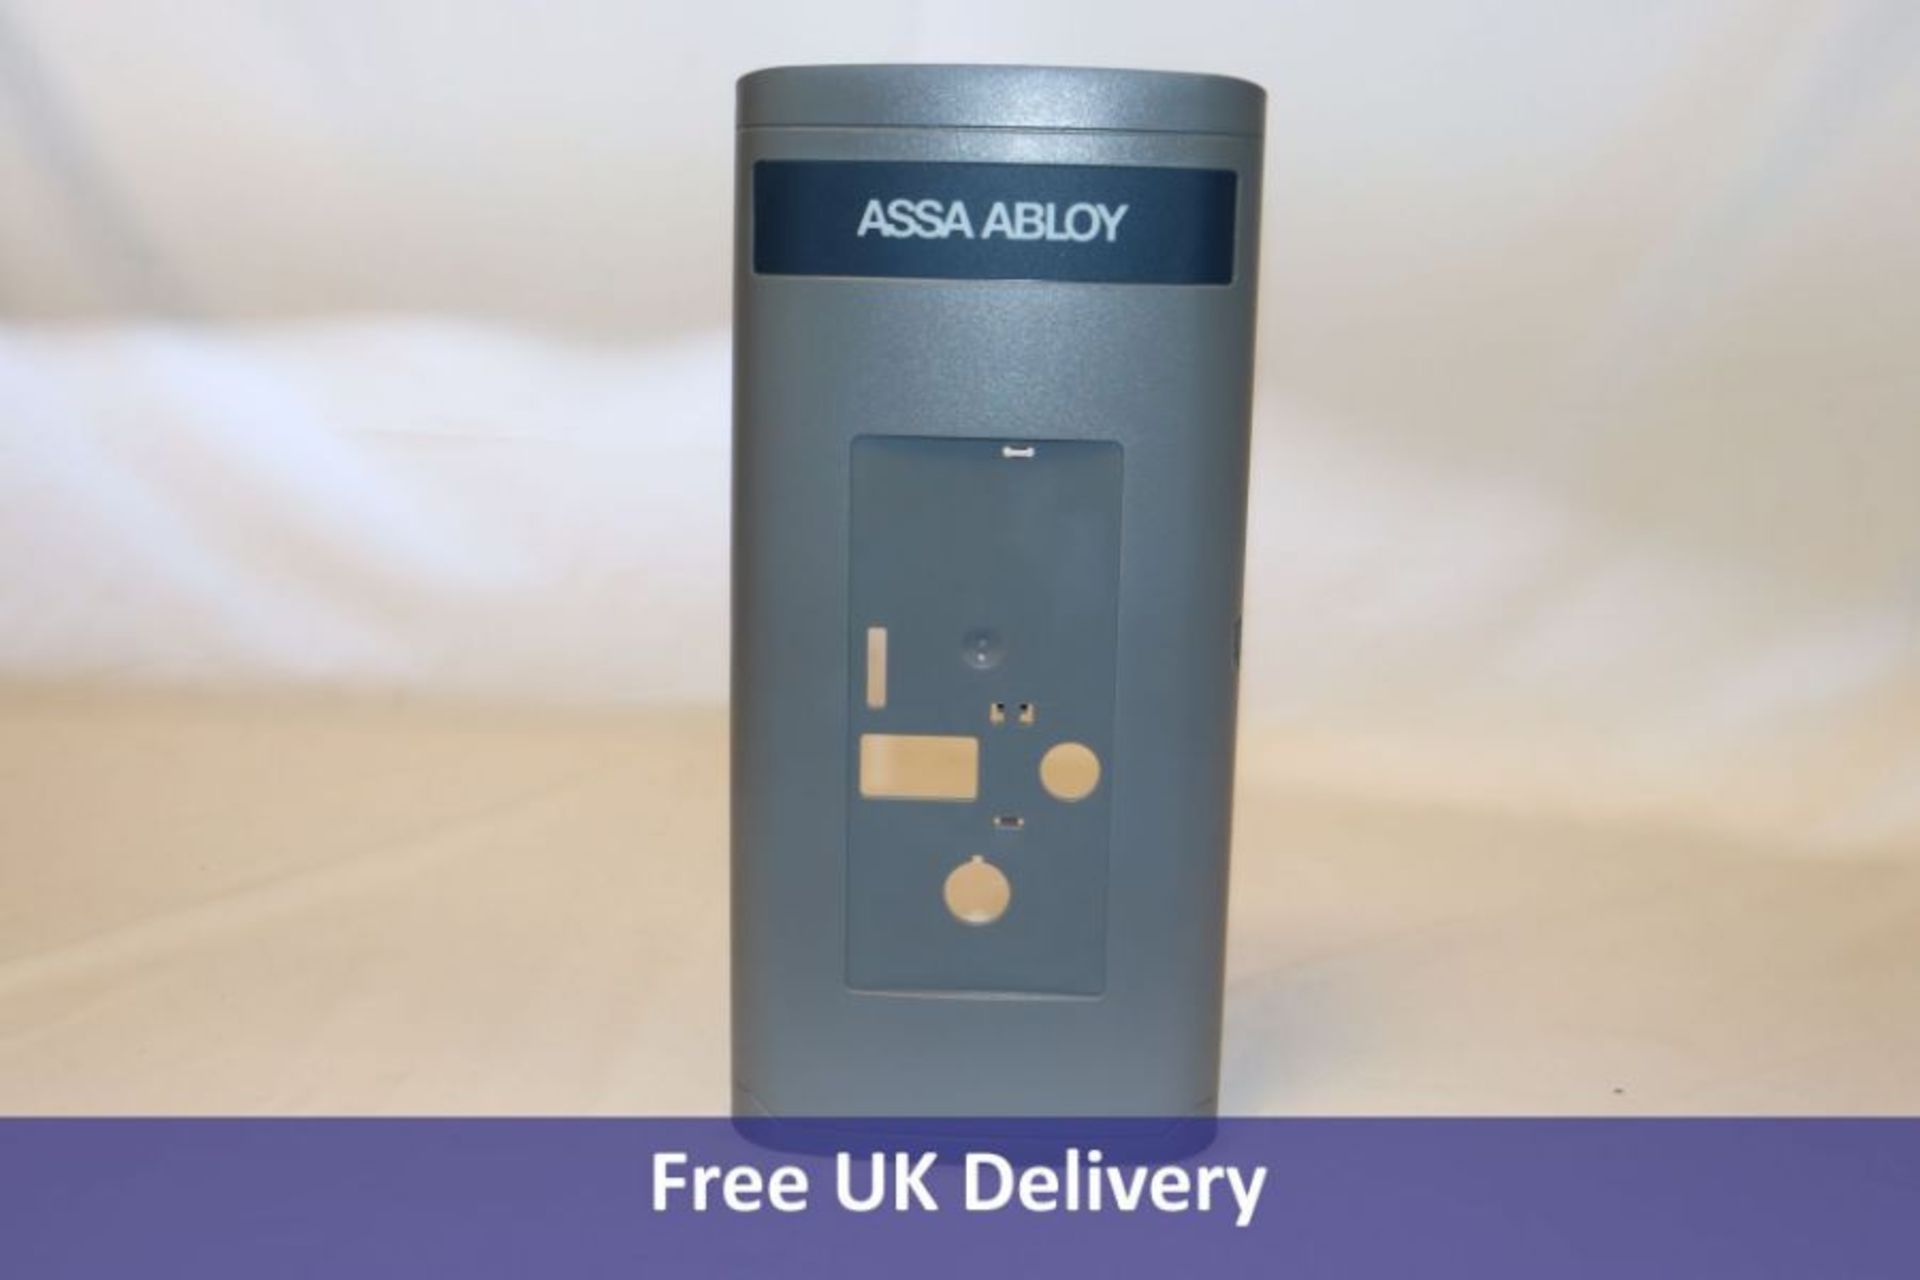 Two Assa Abloy items to include 1x Upper Housing Cover for 950 Air Handling Unit, K047974, 1x 5kg Cl